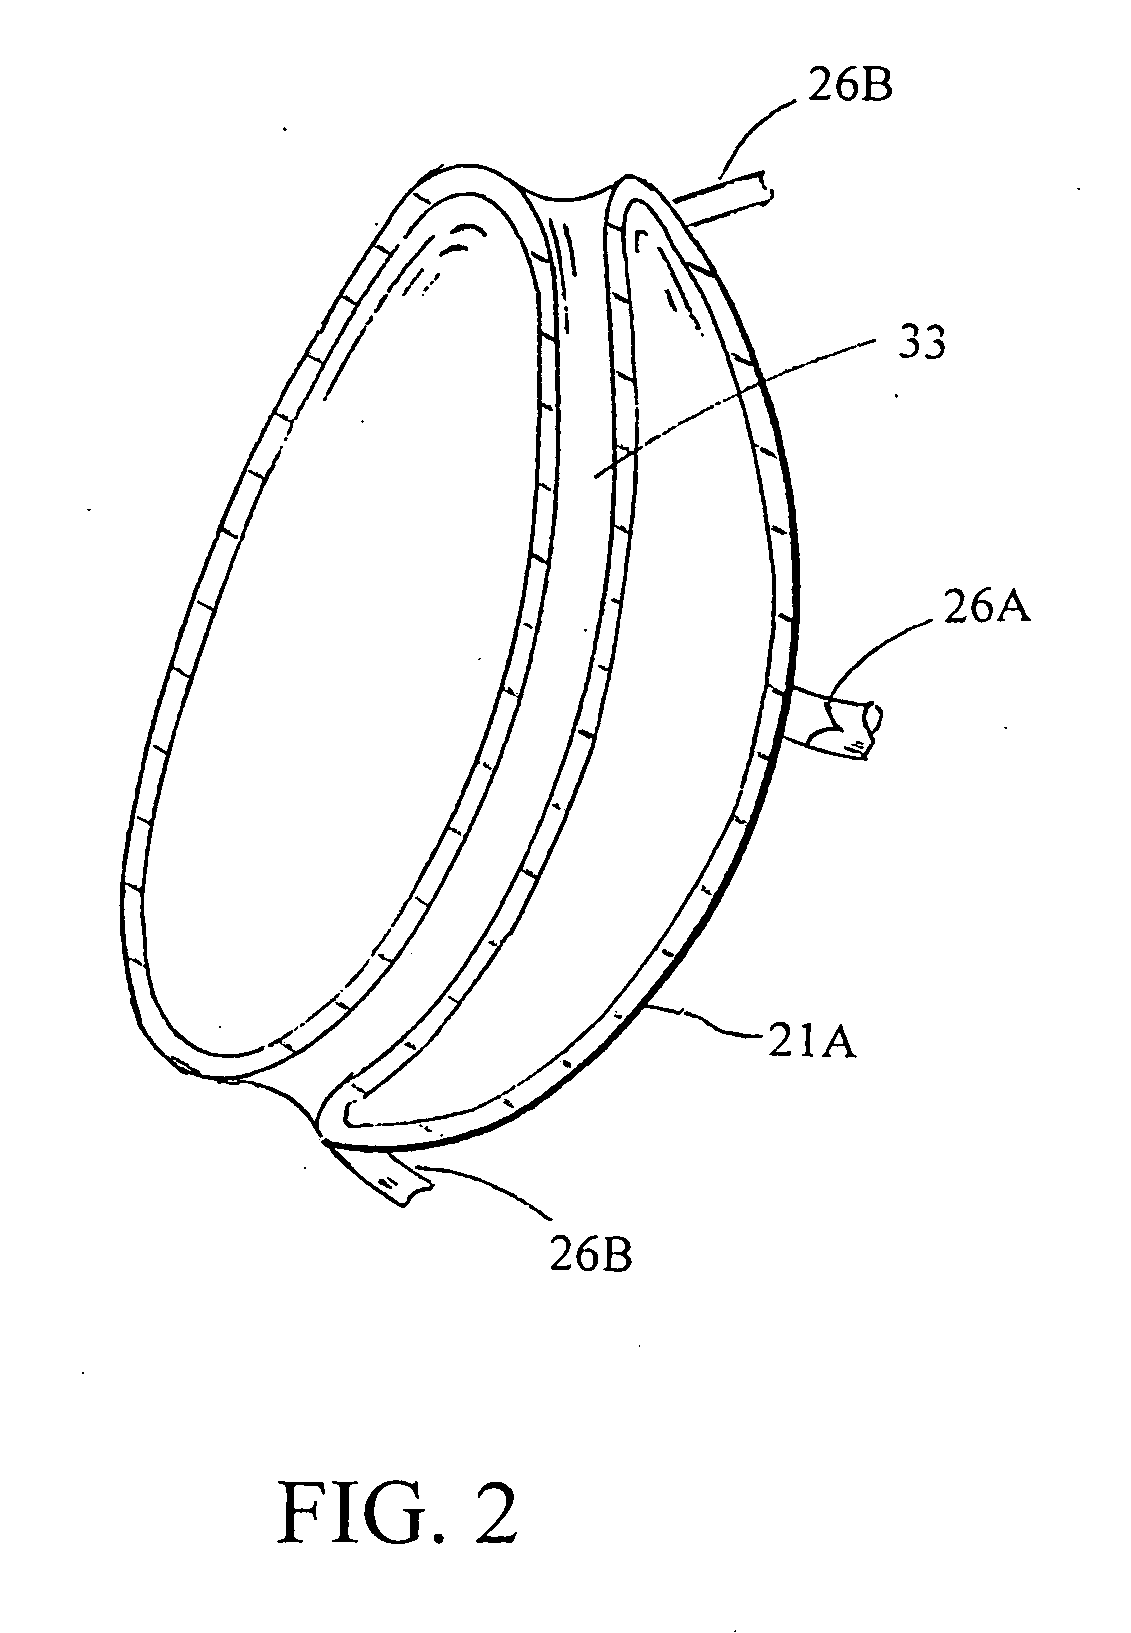 Intragastric space filler and methods of manufacture